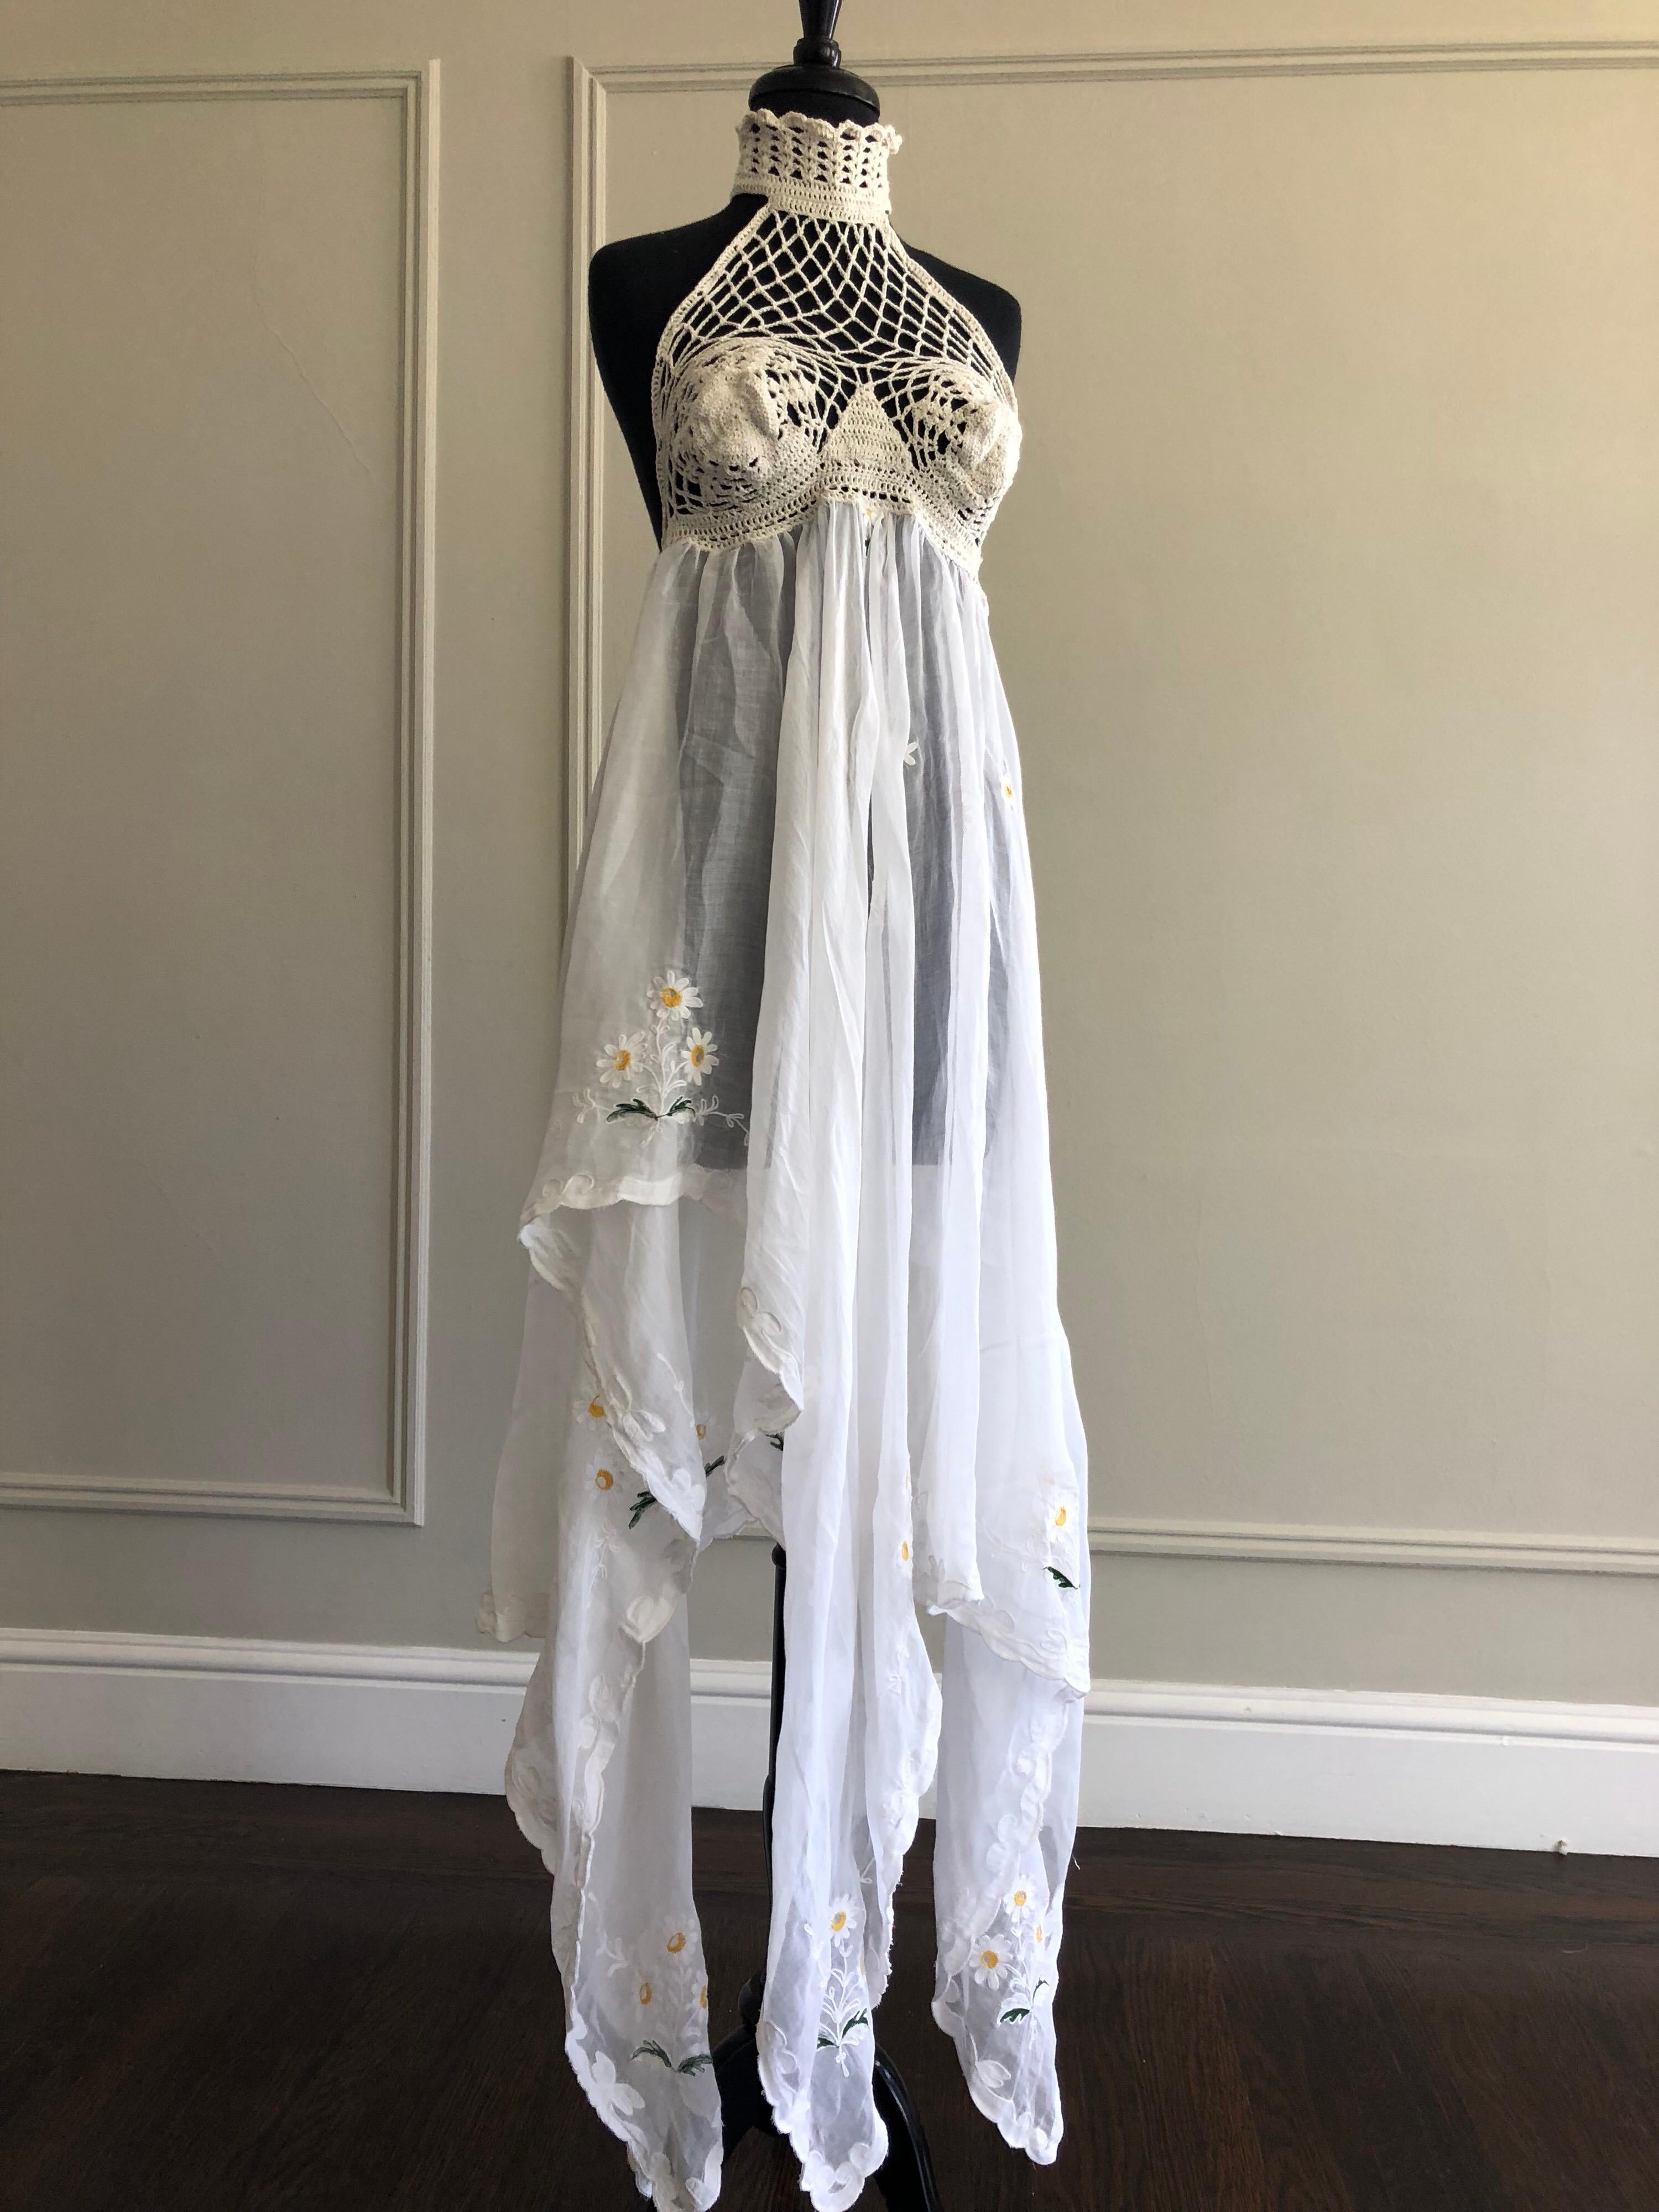 1970s-Style Crochet Halter Dress W/ Daisy Embroidered Linen Handkerchief Hem In Excellent Condition For Sale In Gresham, OR